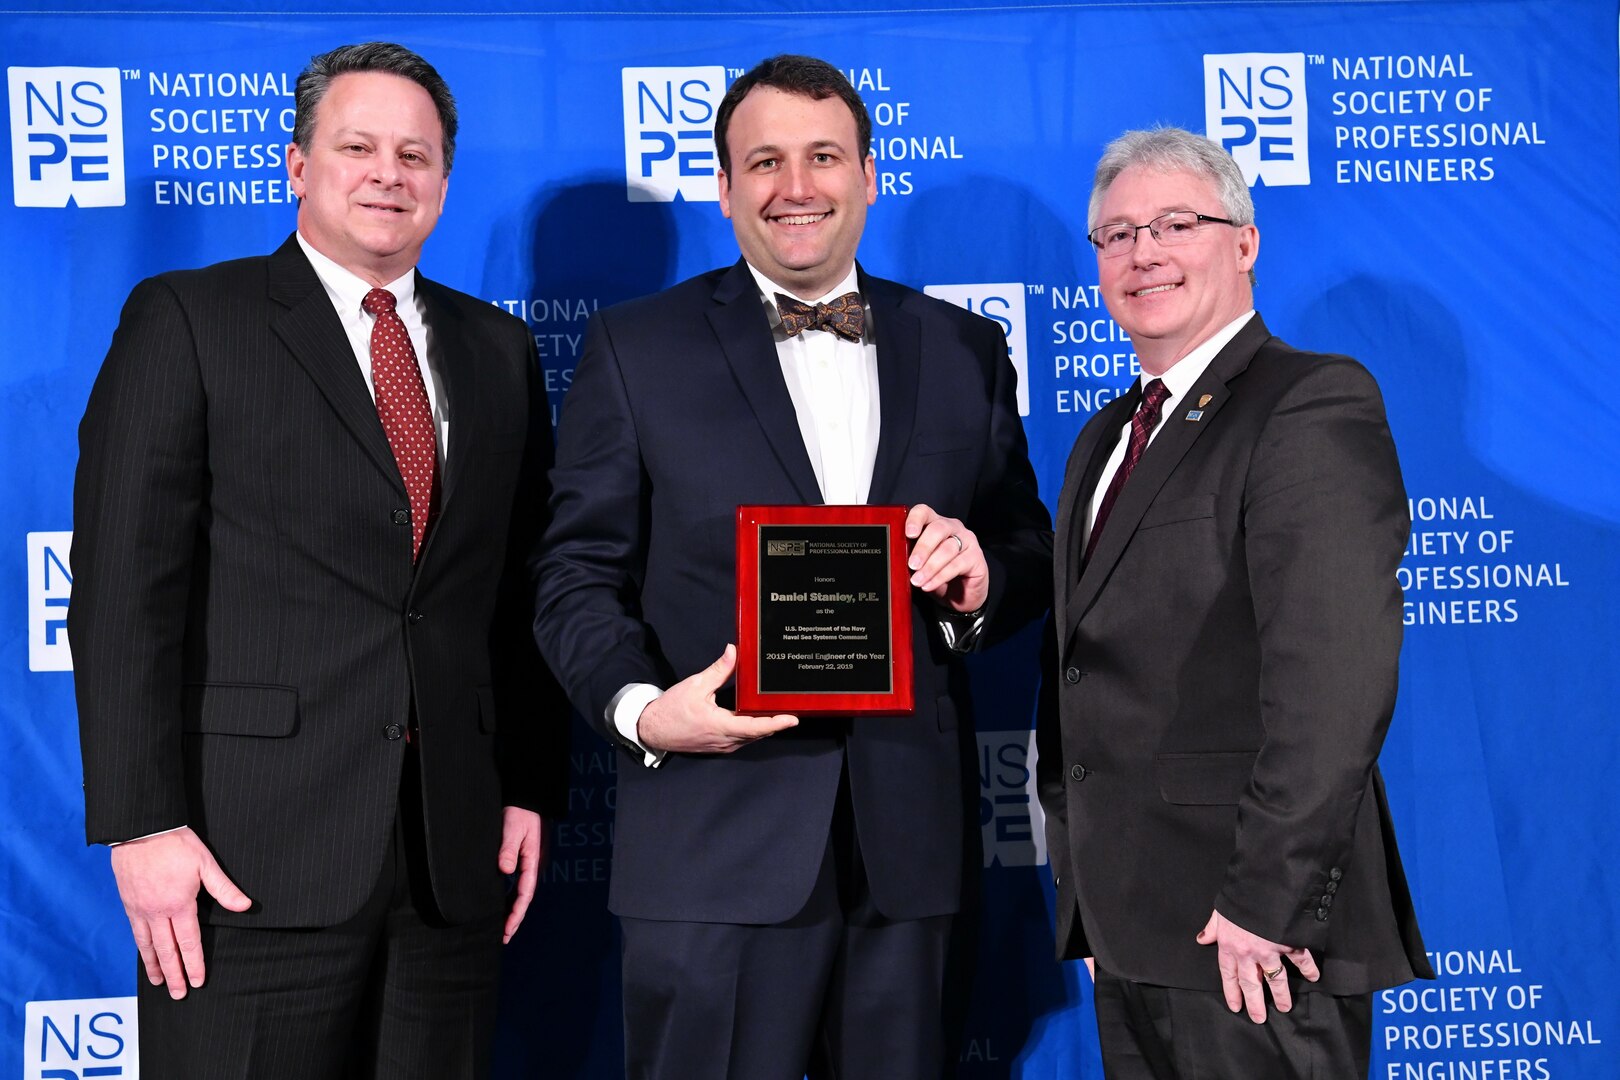 Congratulations to Norfolk Naval Shipyard (NNSY) Supervisory Mechanical Engineer Dan Stanley, recognized as a Federal Engineer of the Year by the National Society of Professional Engineers at a Feb. 22 ceremony in Washington D.C.   At left with Stanley is NNSY Engineering and Planning Department Code 240 Chief Engineer, Mark Everett.